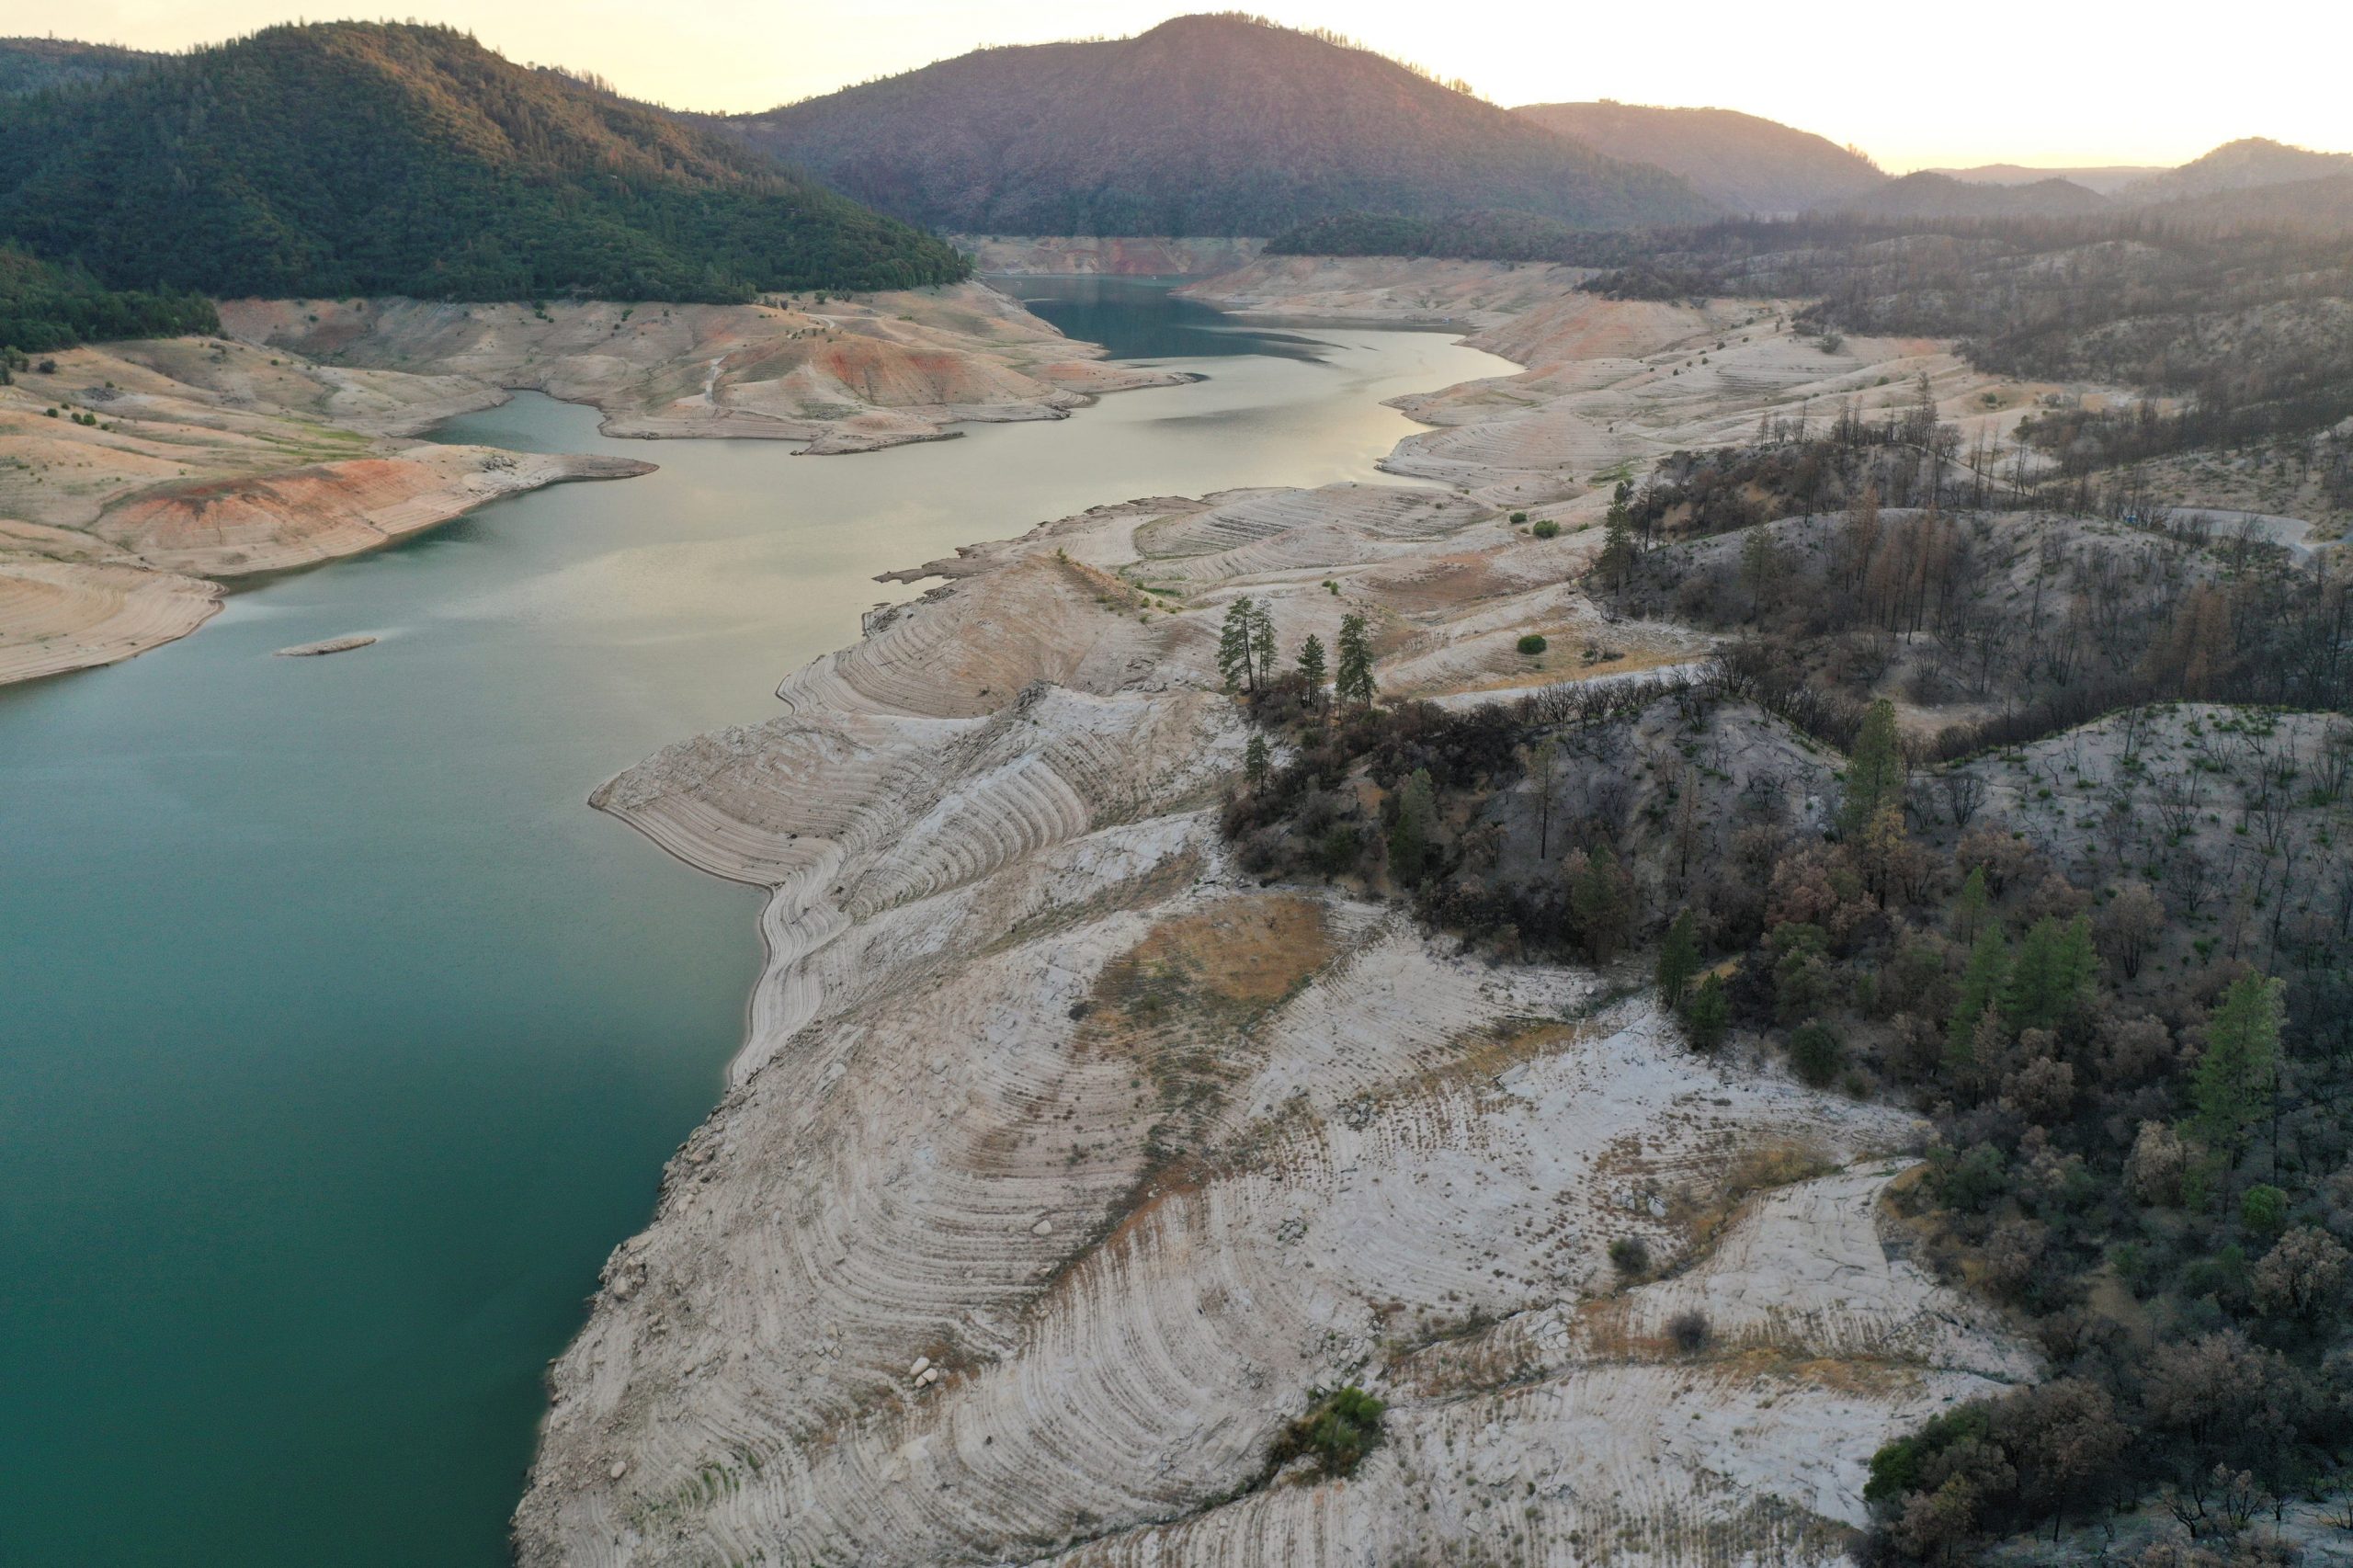 low water levels at lake oroville reveal bare shorelines